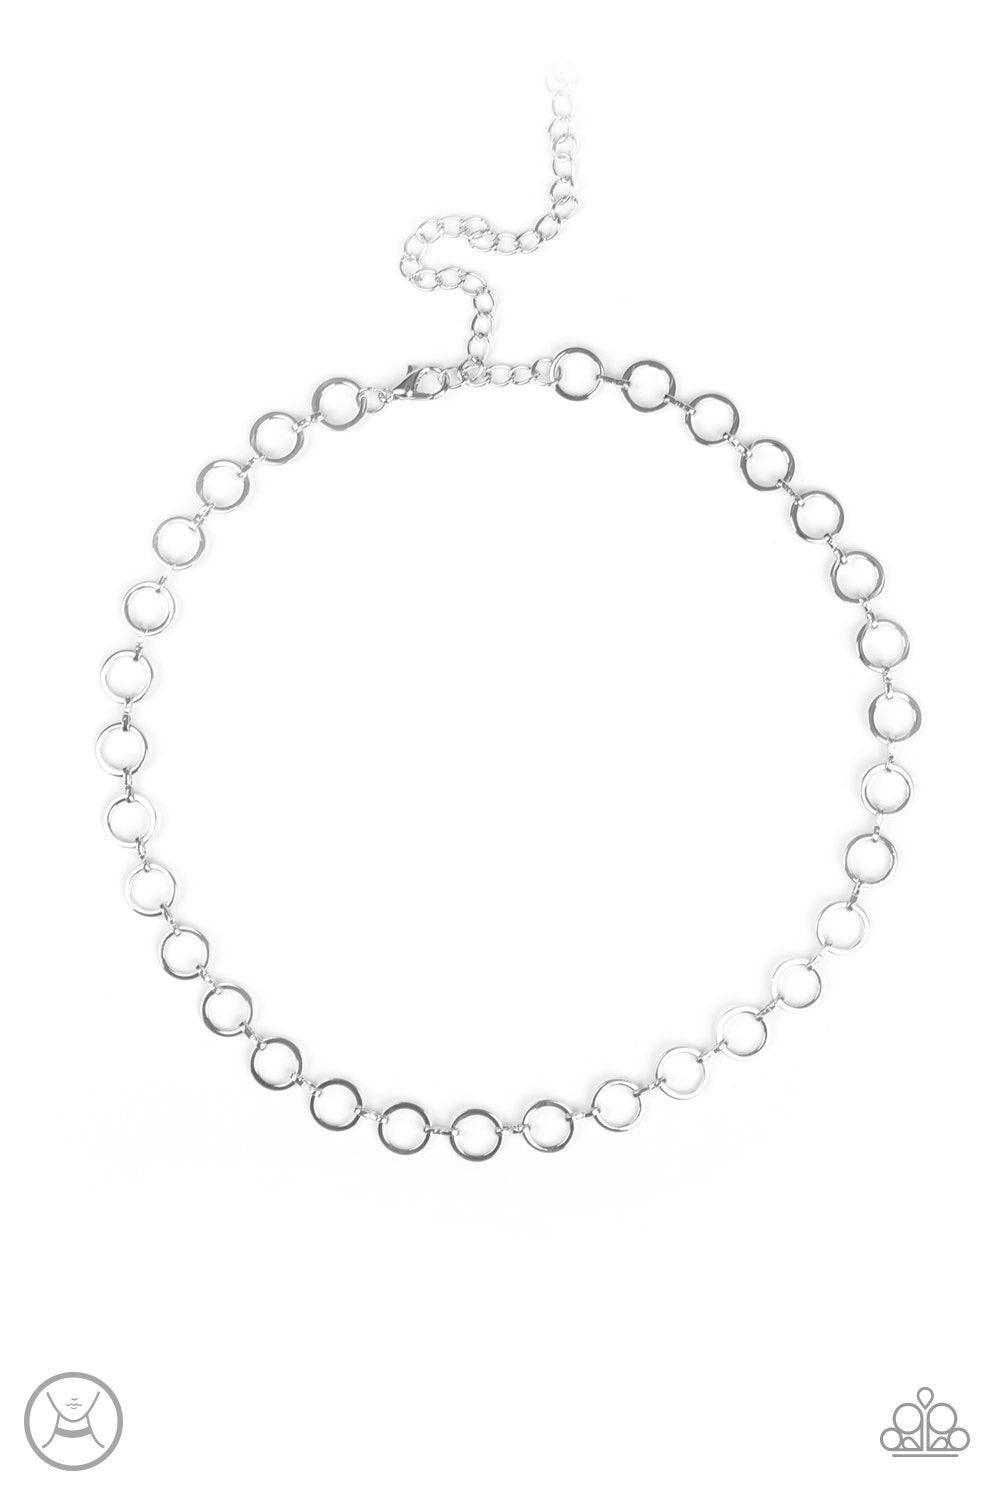 Paparazzi Accessories Roundabout Radiance - Silver Dainty silver rings link around the neck for a minimalist inspired shimmer. Features an adjustable clasp closure. Jewelry